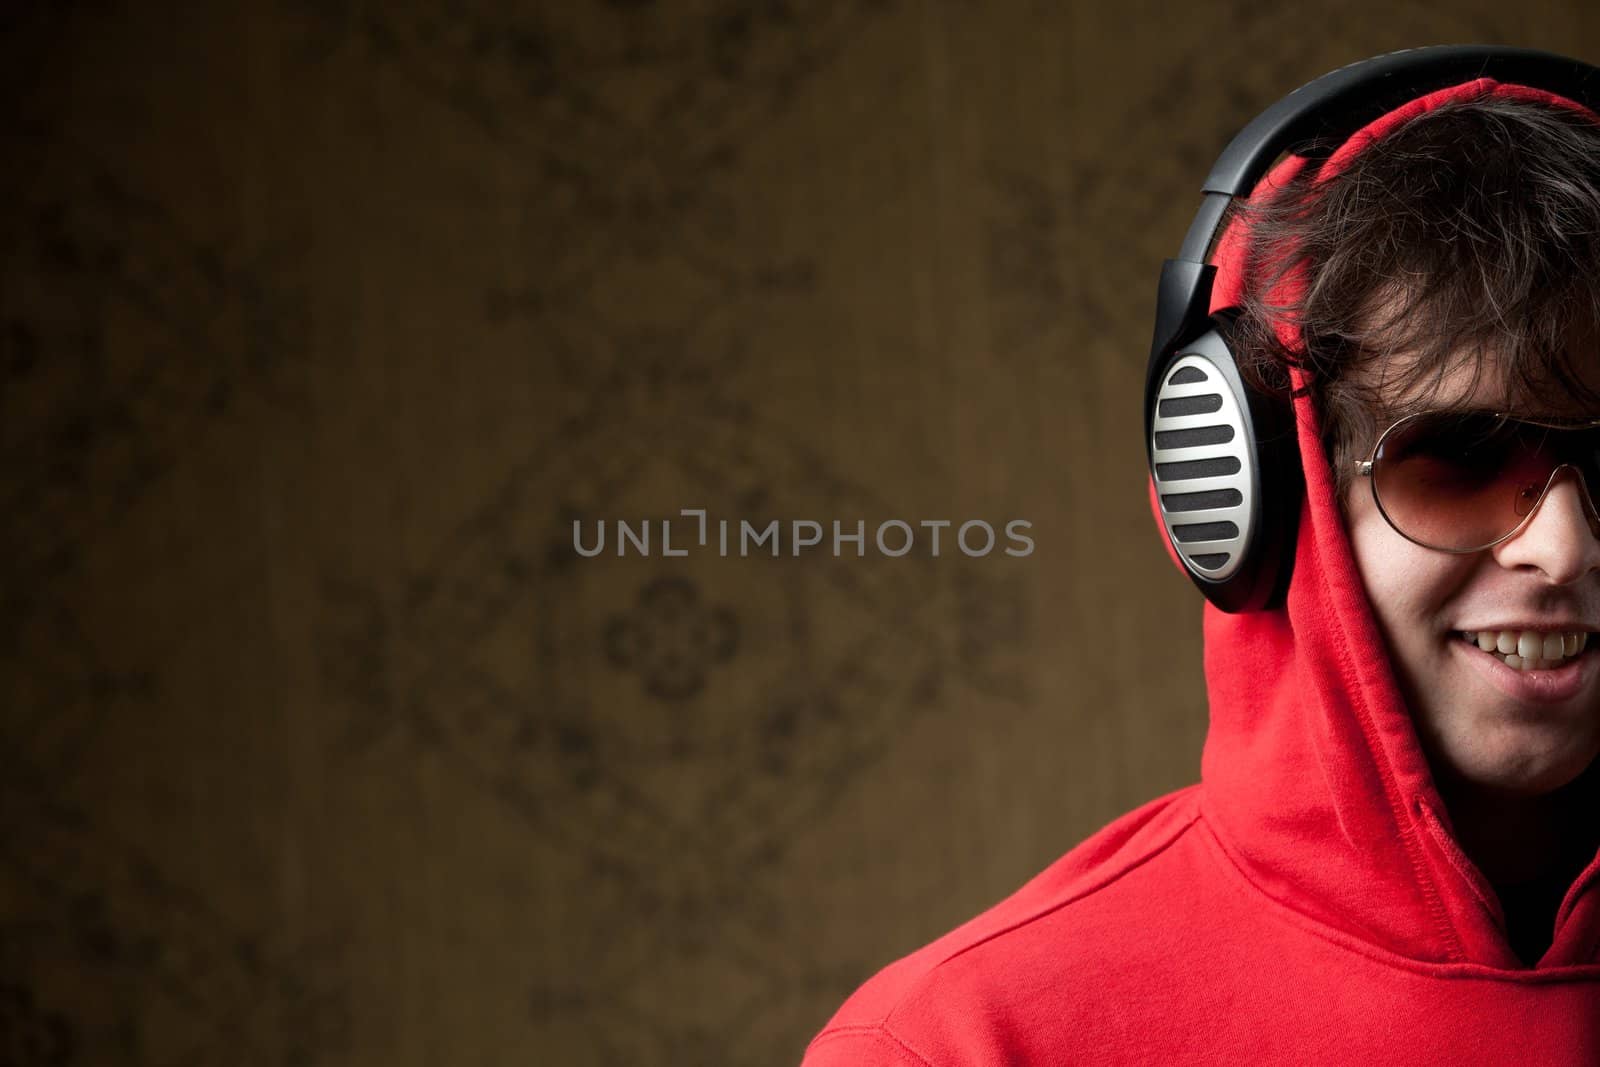 An image of a young boy listening to music in headphones